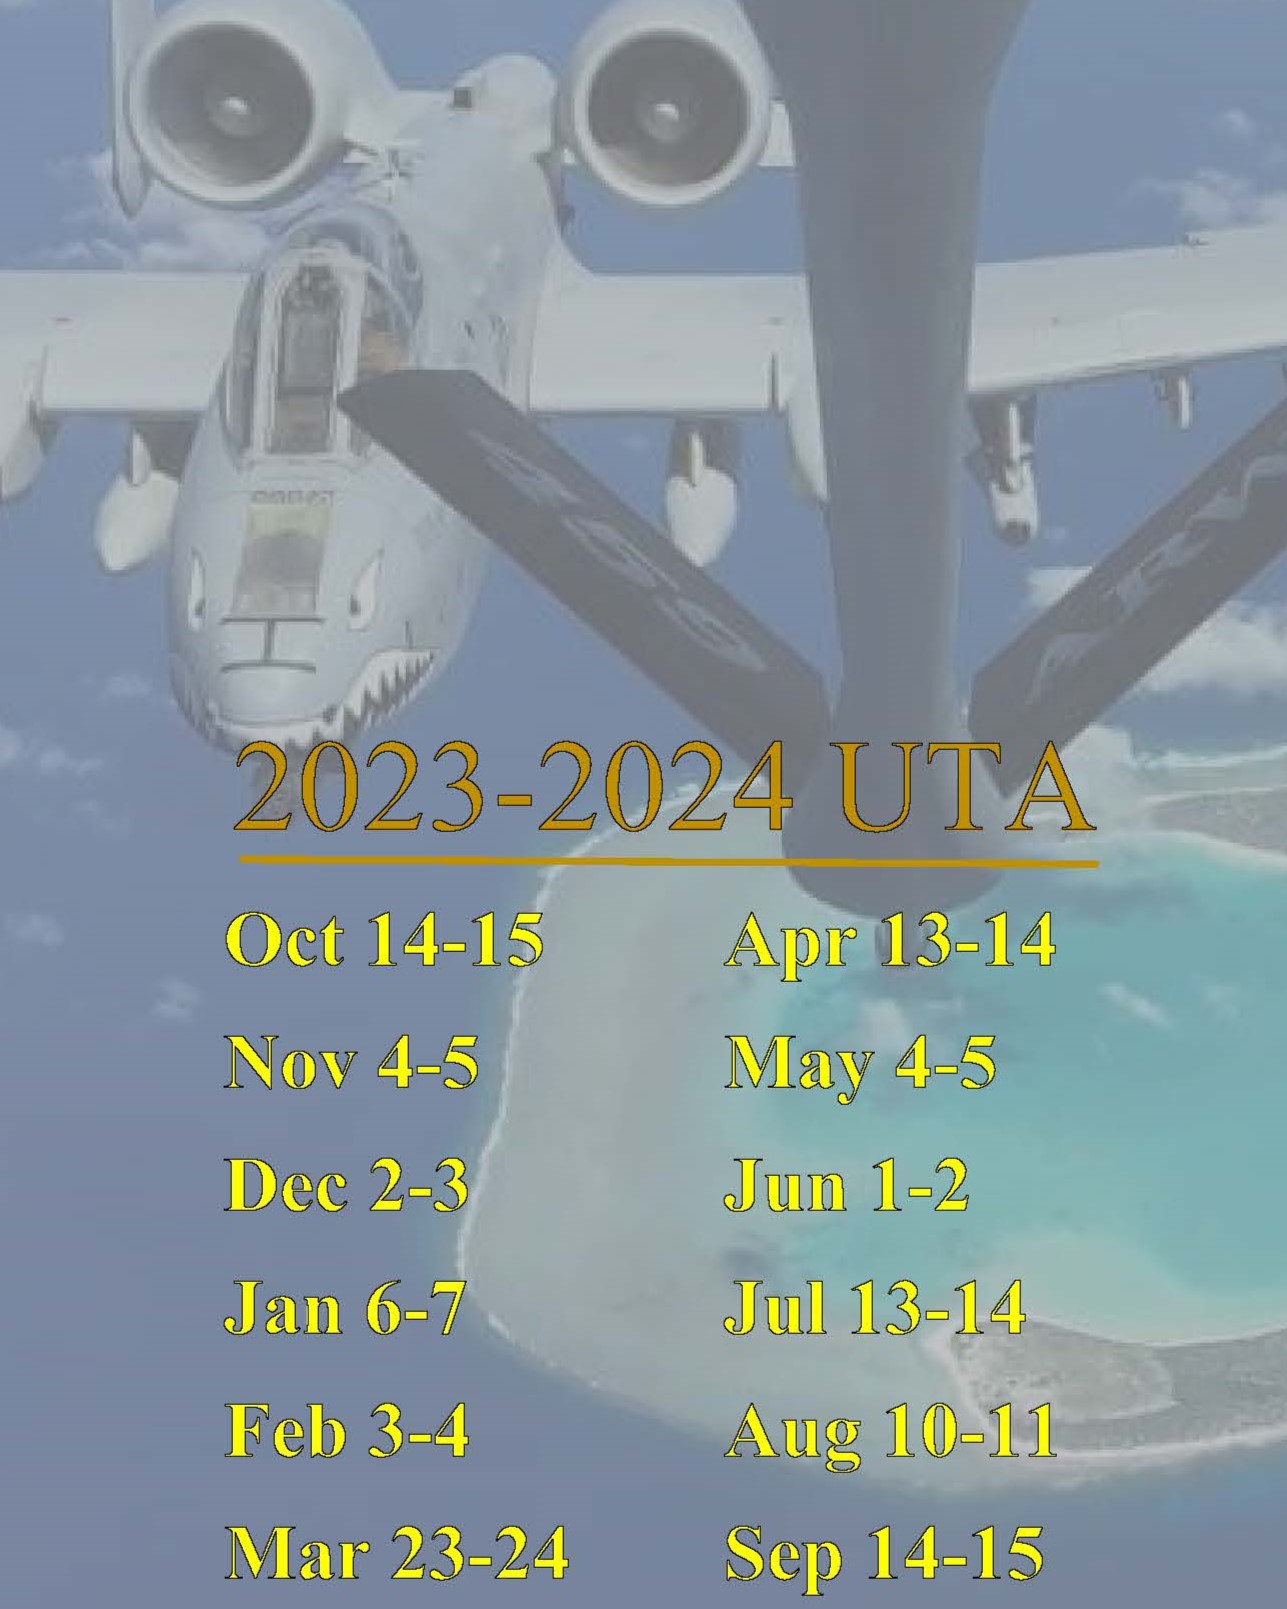 Unit Training Assembly schedule for fiscal year 2023 to 2024. The dates are as follows: October 14-15 2023; November 4-5, 2023; December 2-3, 2023; January 6-7, 2024; February 3-4, 2024; March 23-24, 2024; April 13-14, 2024; May 4-5, 2024; June 1-2, 2024; July 13-14, 2024; August 10-11, 2024; and September 14-15, 2024.